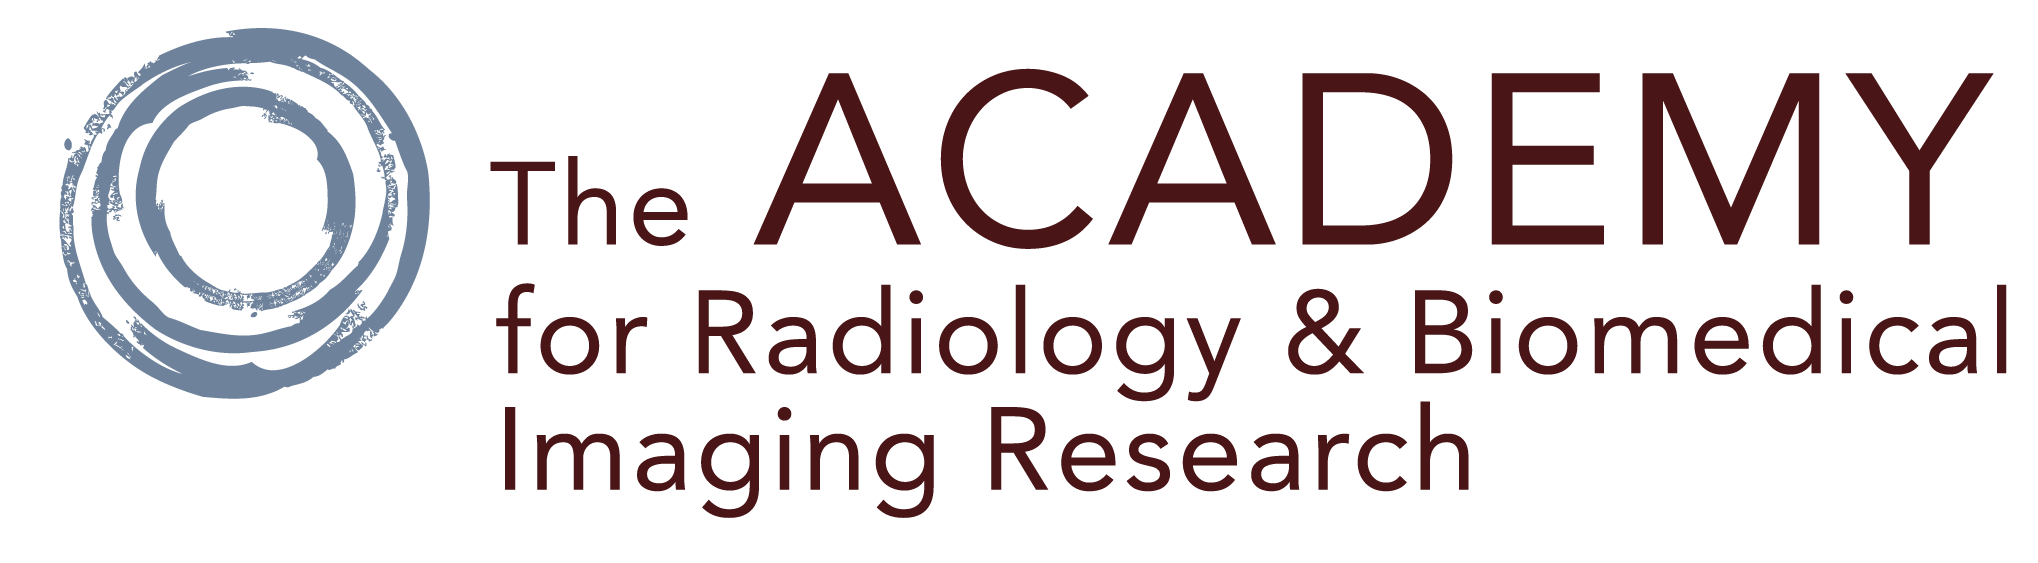 Academy Of Radiology and Biomedical Imaging Research